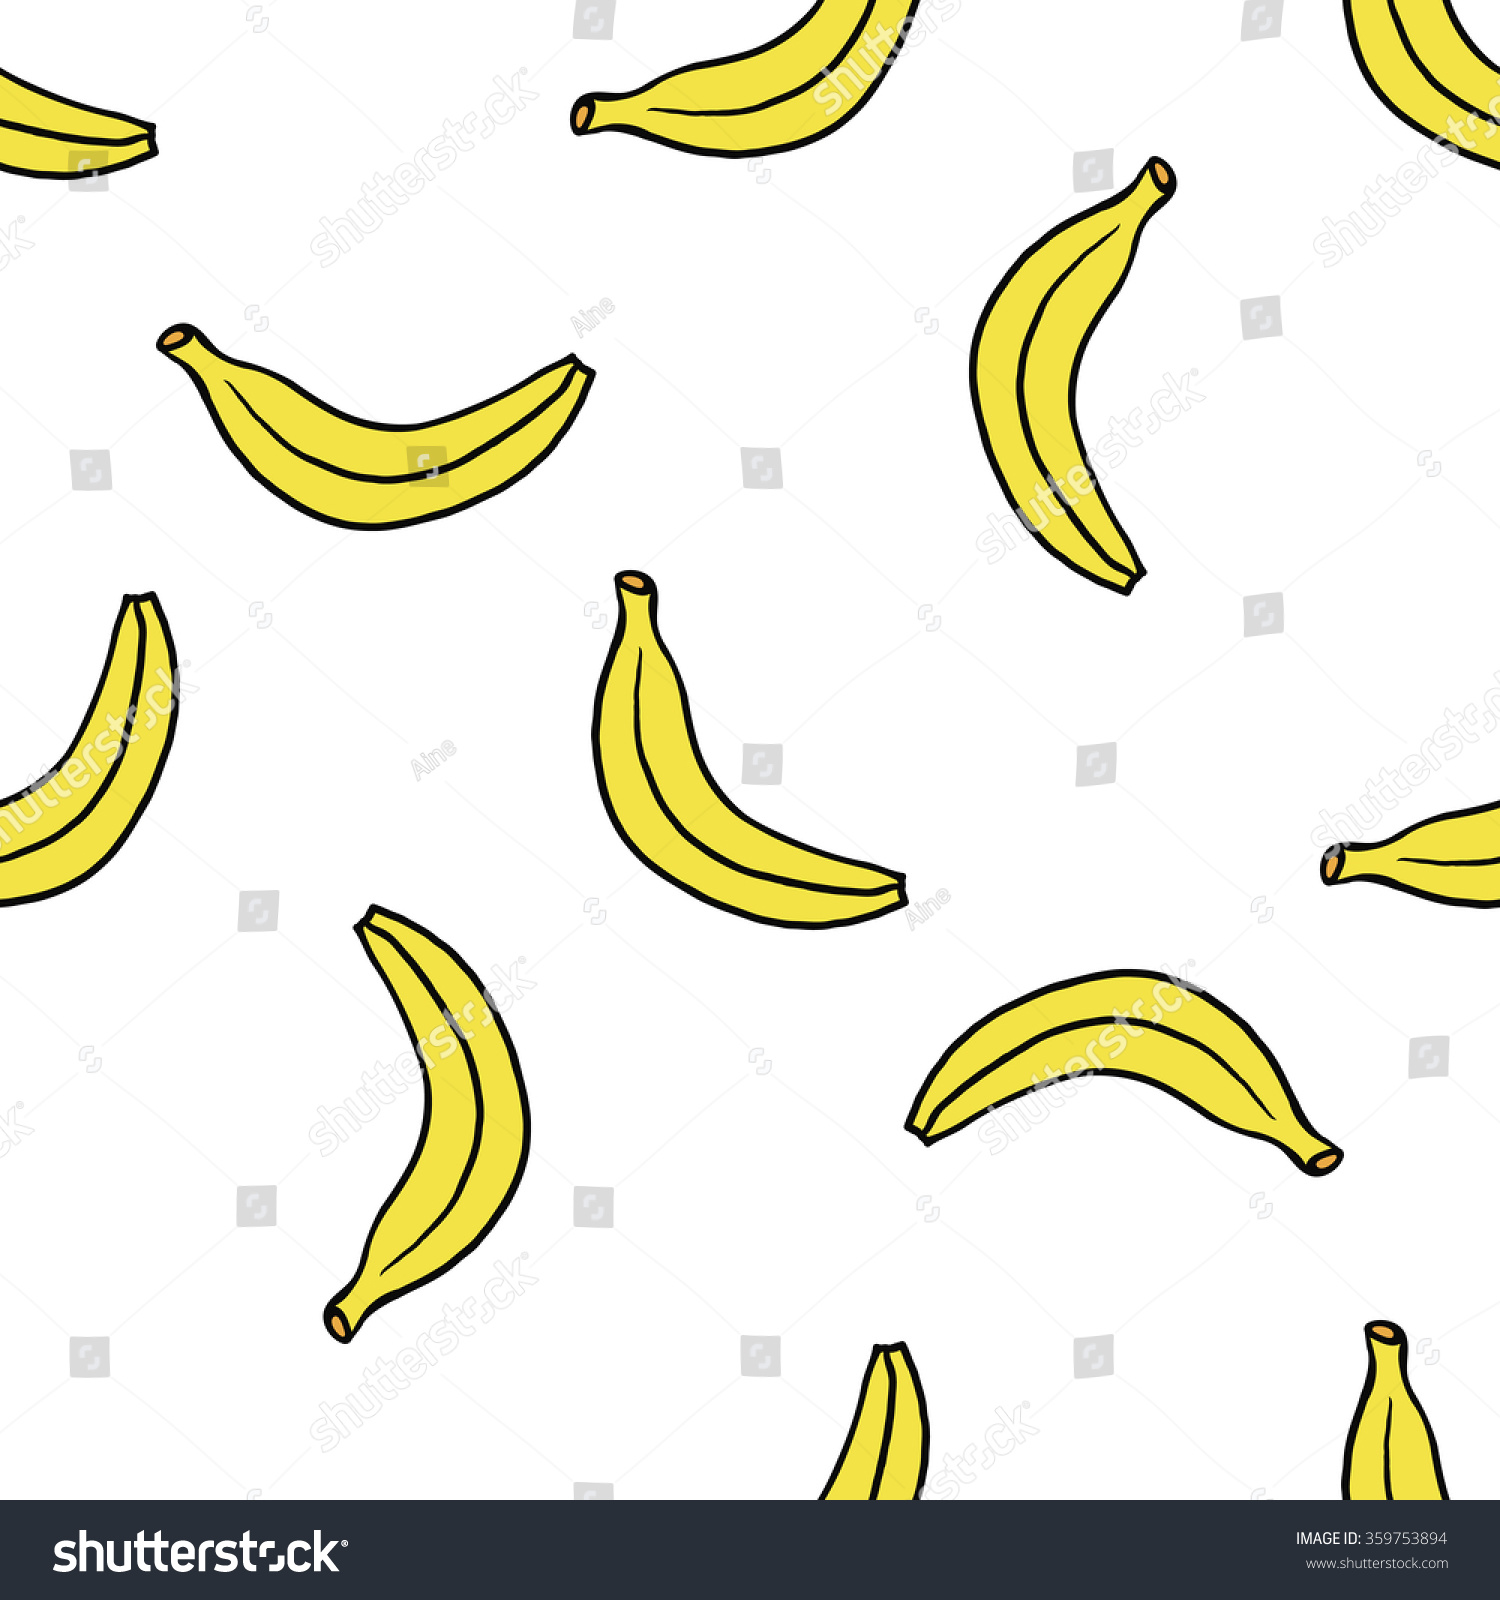 Seamless Pattern With Cartoon Doodle Banana Fruit Background Vector Illustration